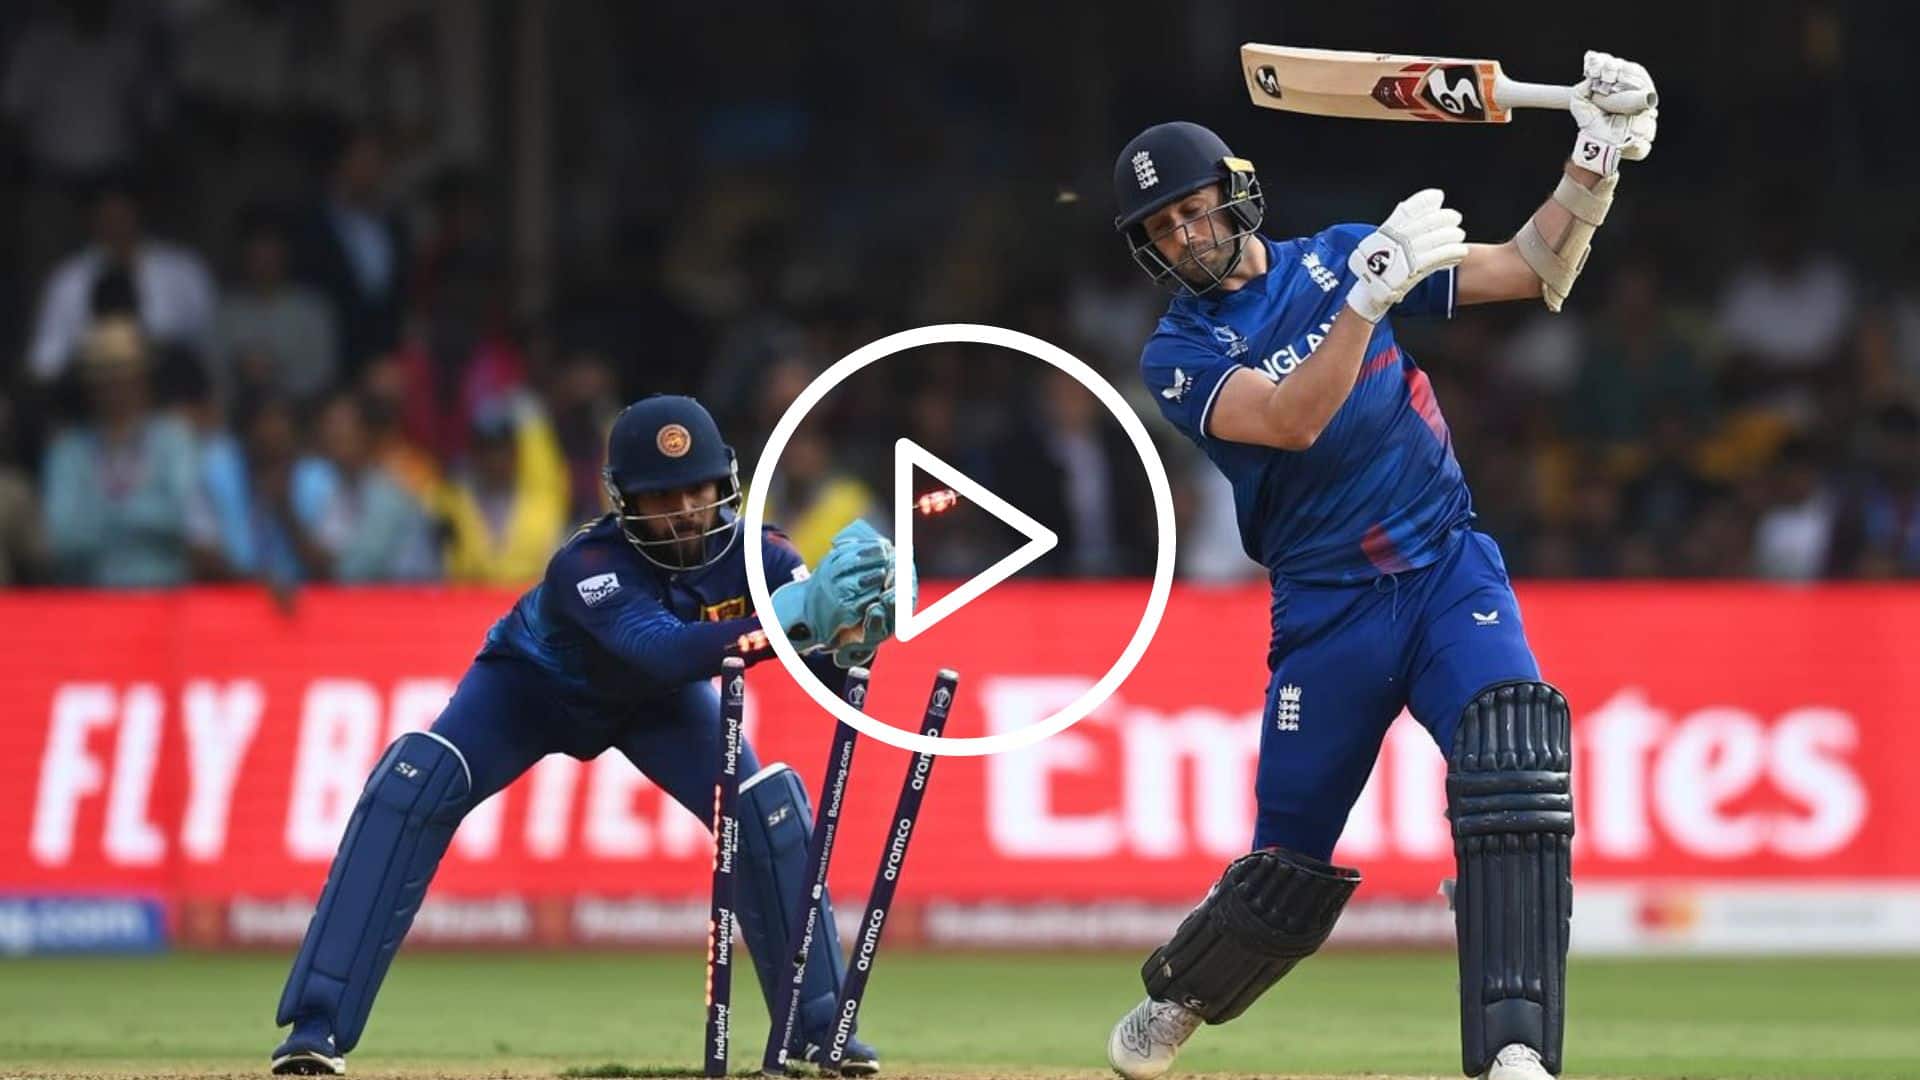 [Watch] Maheesh Theekshana Magical Mystery Delivery Bundles Out England For 156